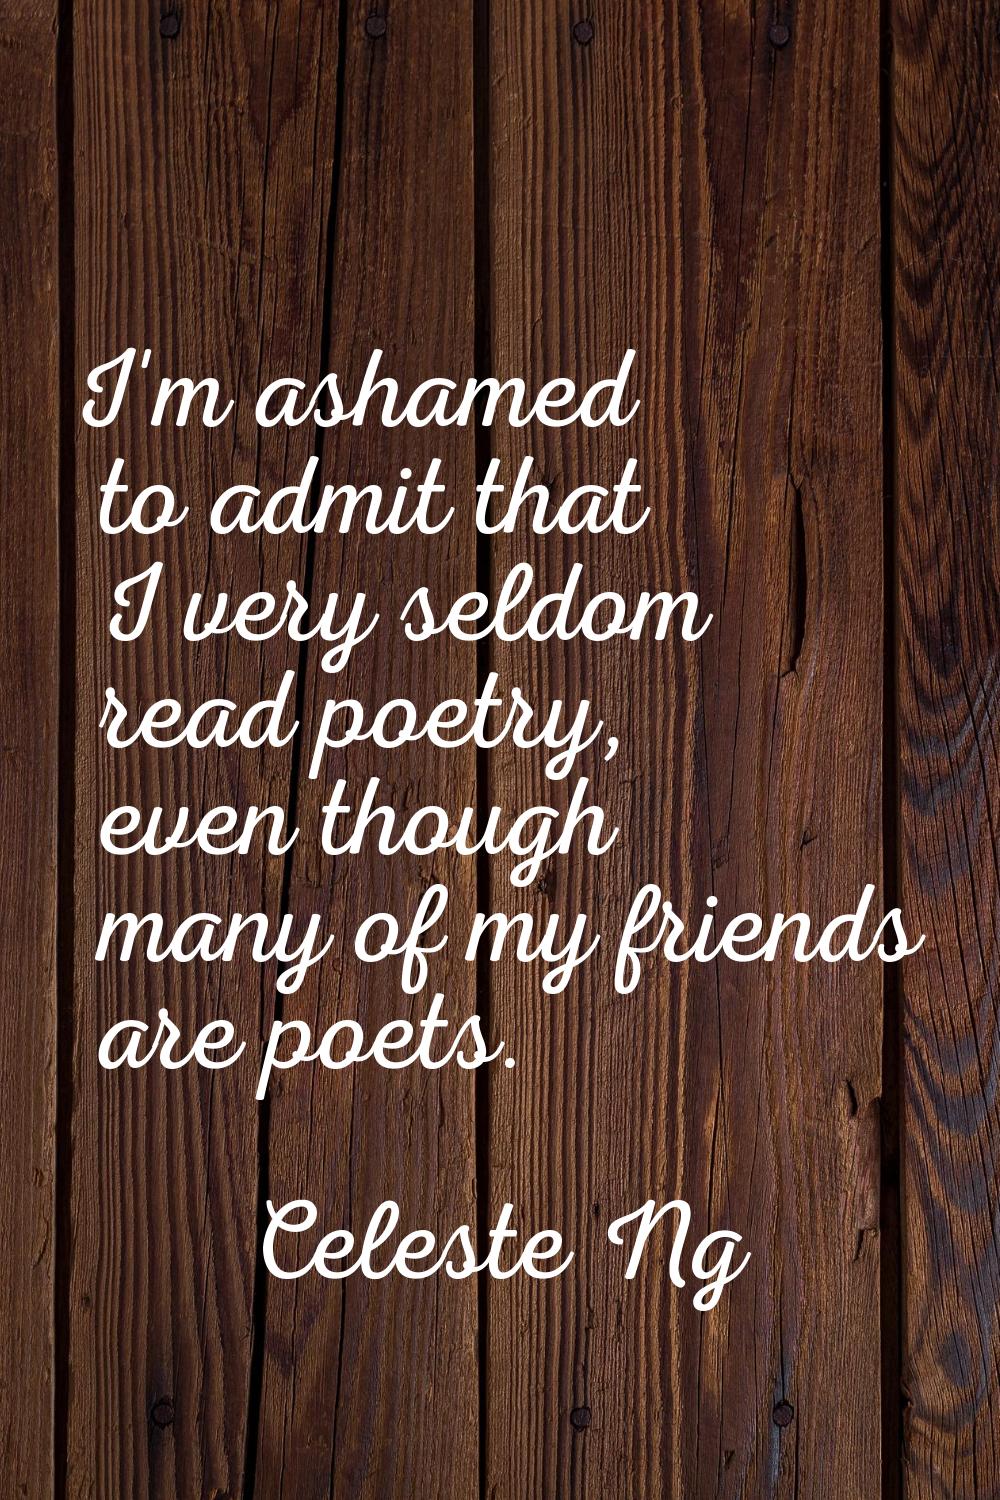 I'm ashamed to admit that I very seldom read poetry, even though many of my friends are poets.